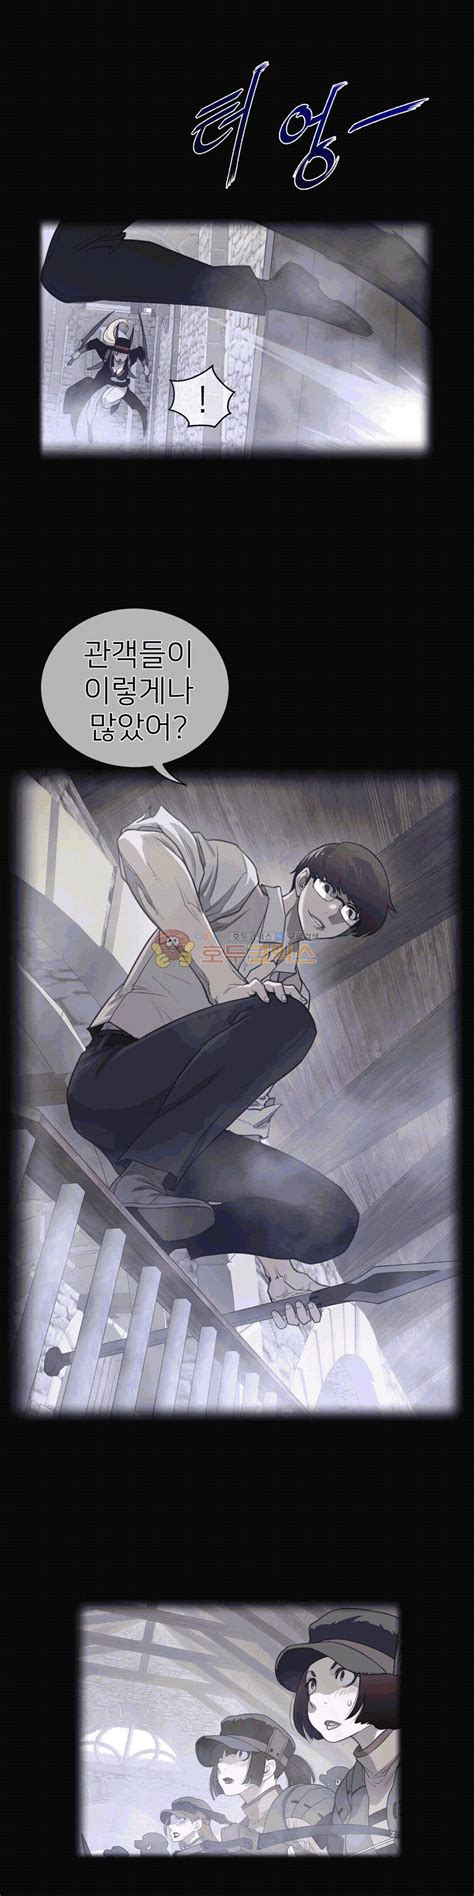 Hide posts about perfect half. Perfect Half Raw - Chapter 115 - MANYTOON - MANHWA 18 RAW